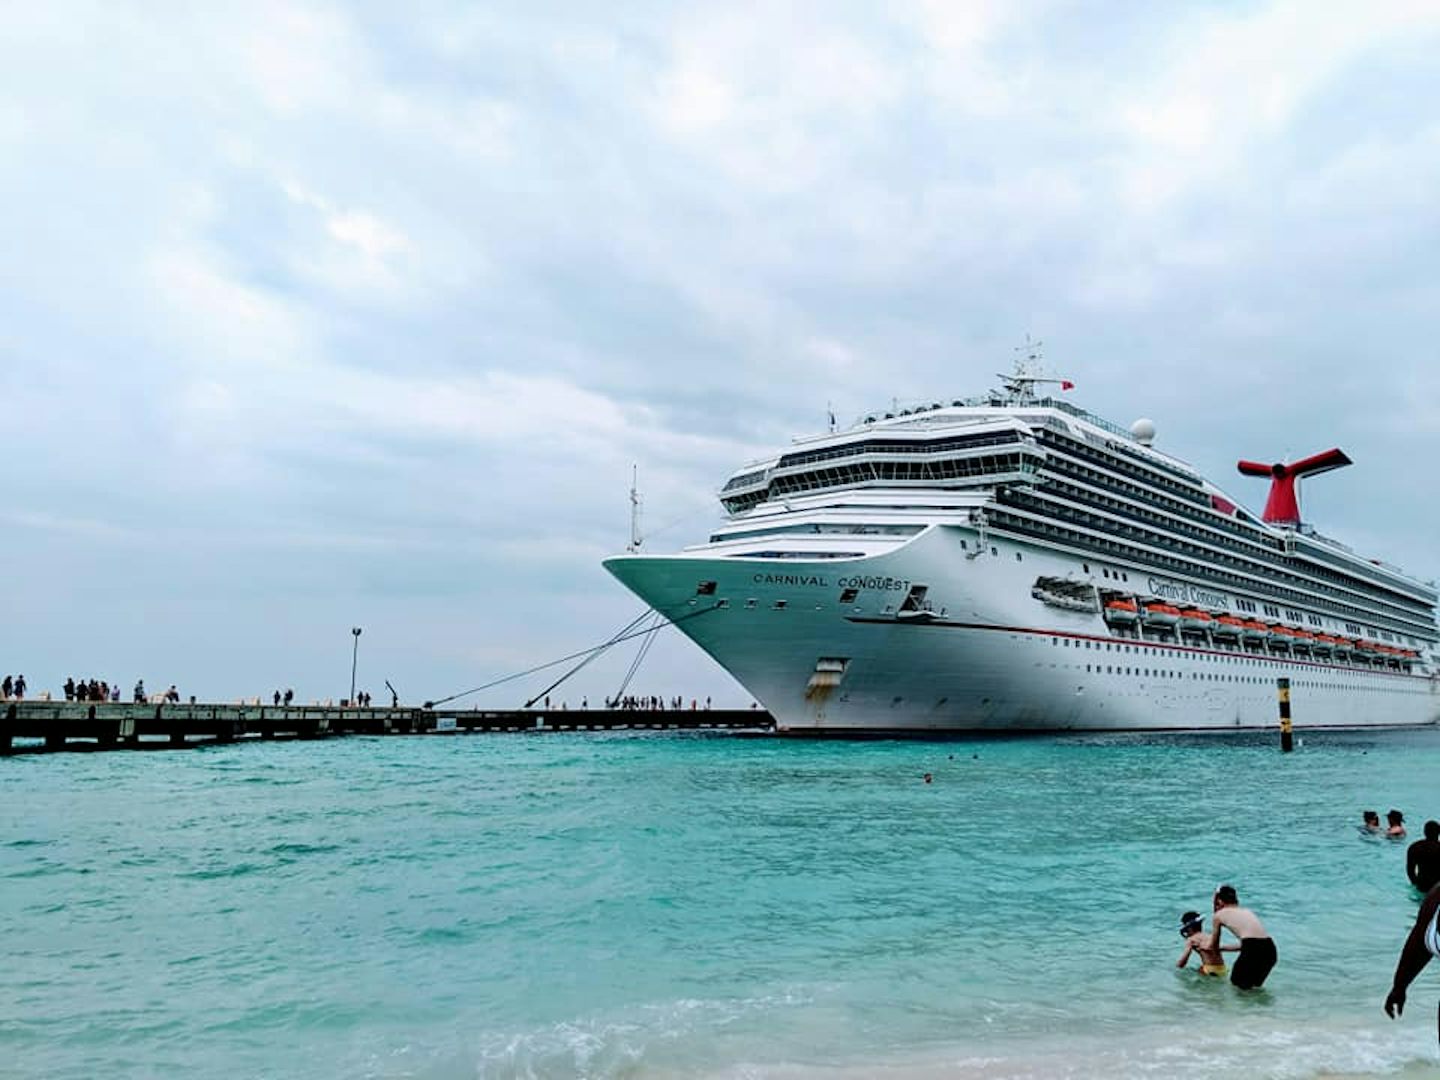 The view of the ship from the beach in Grand Turk